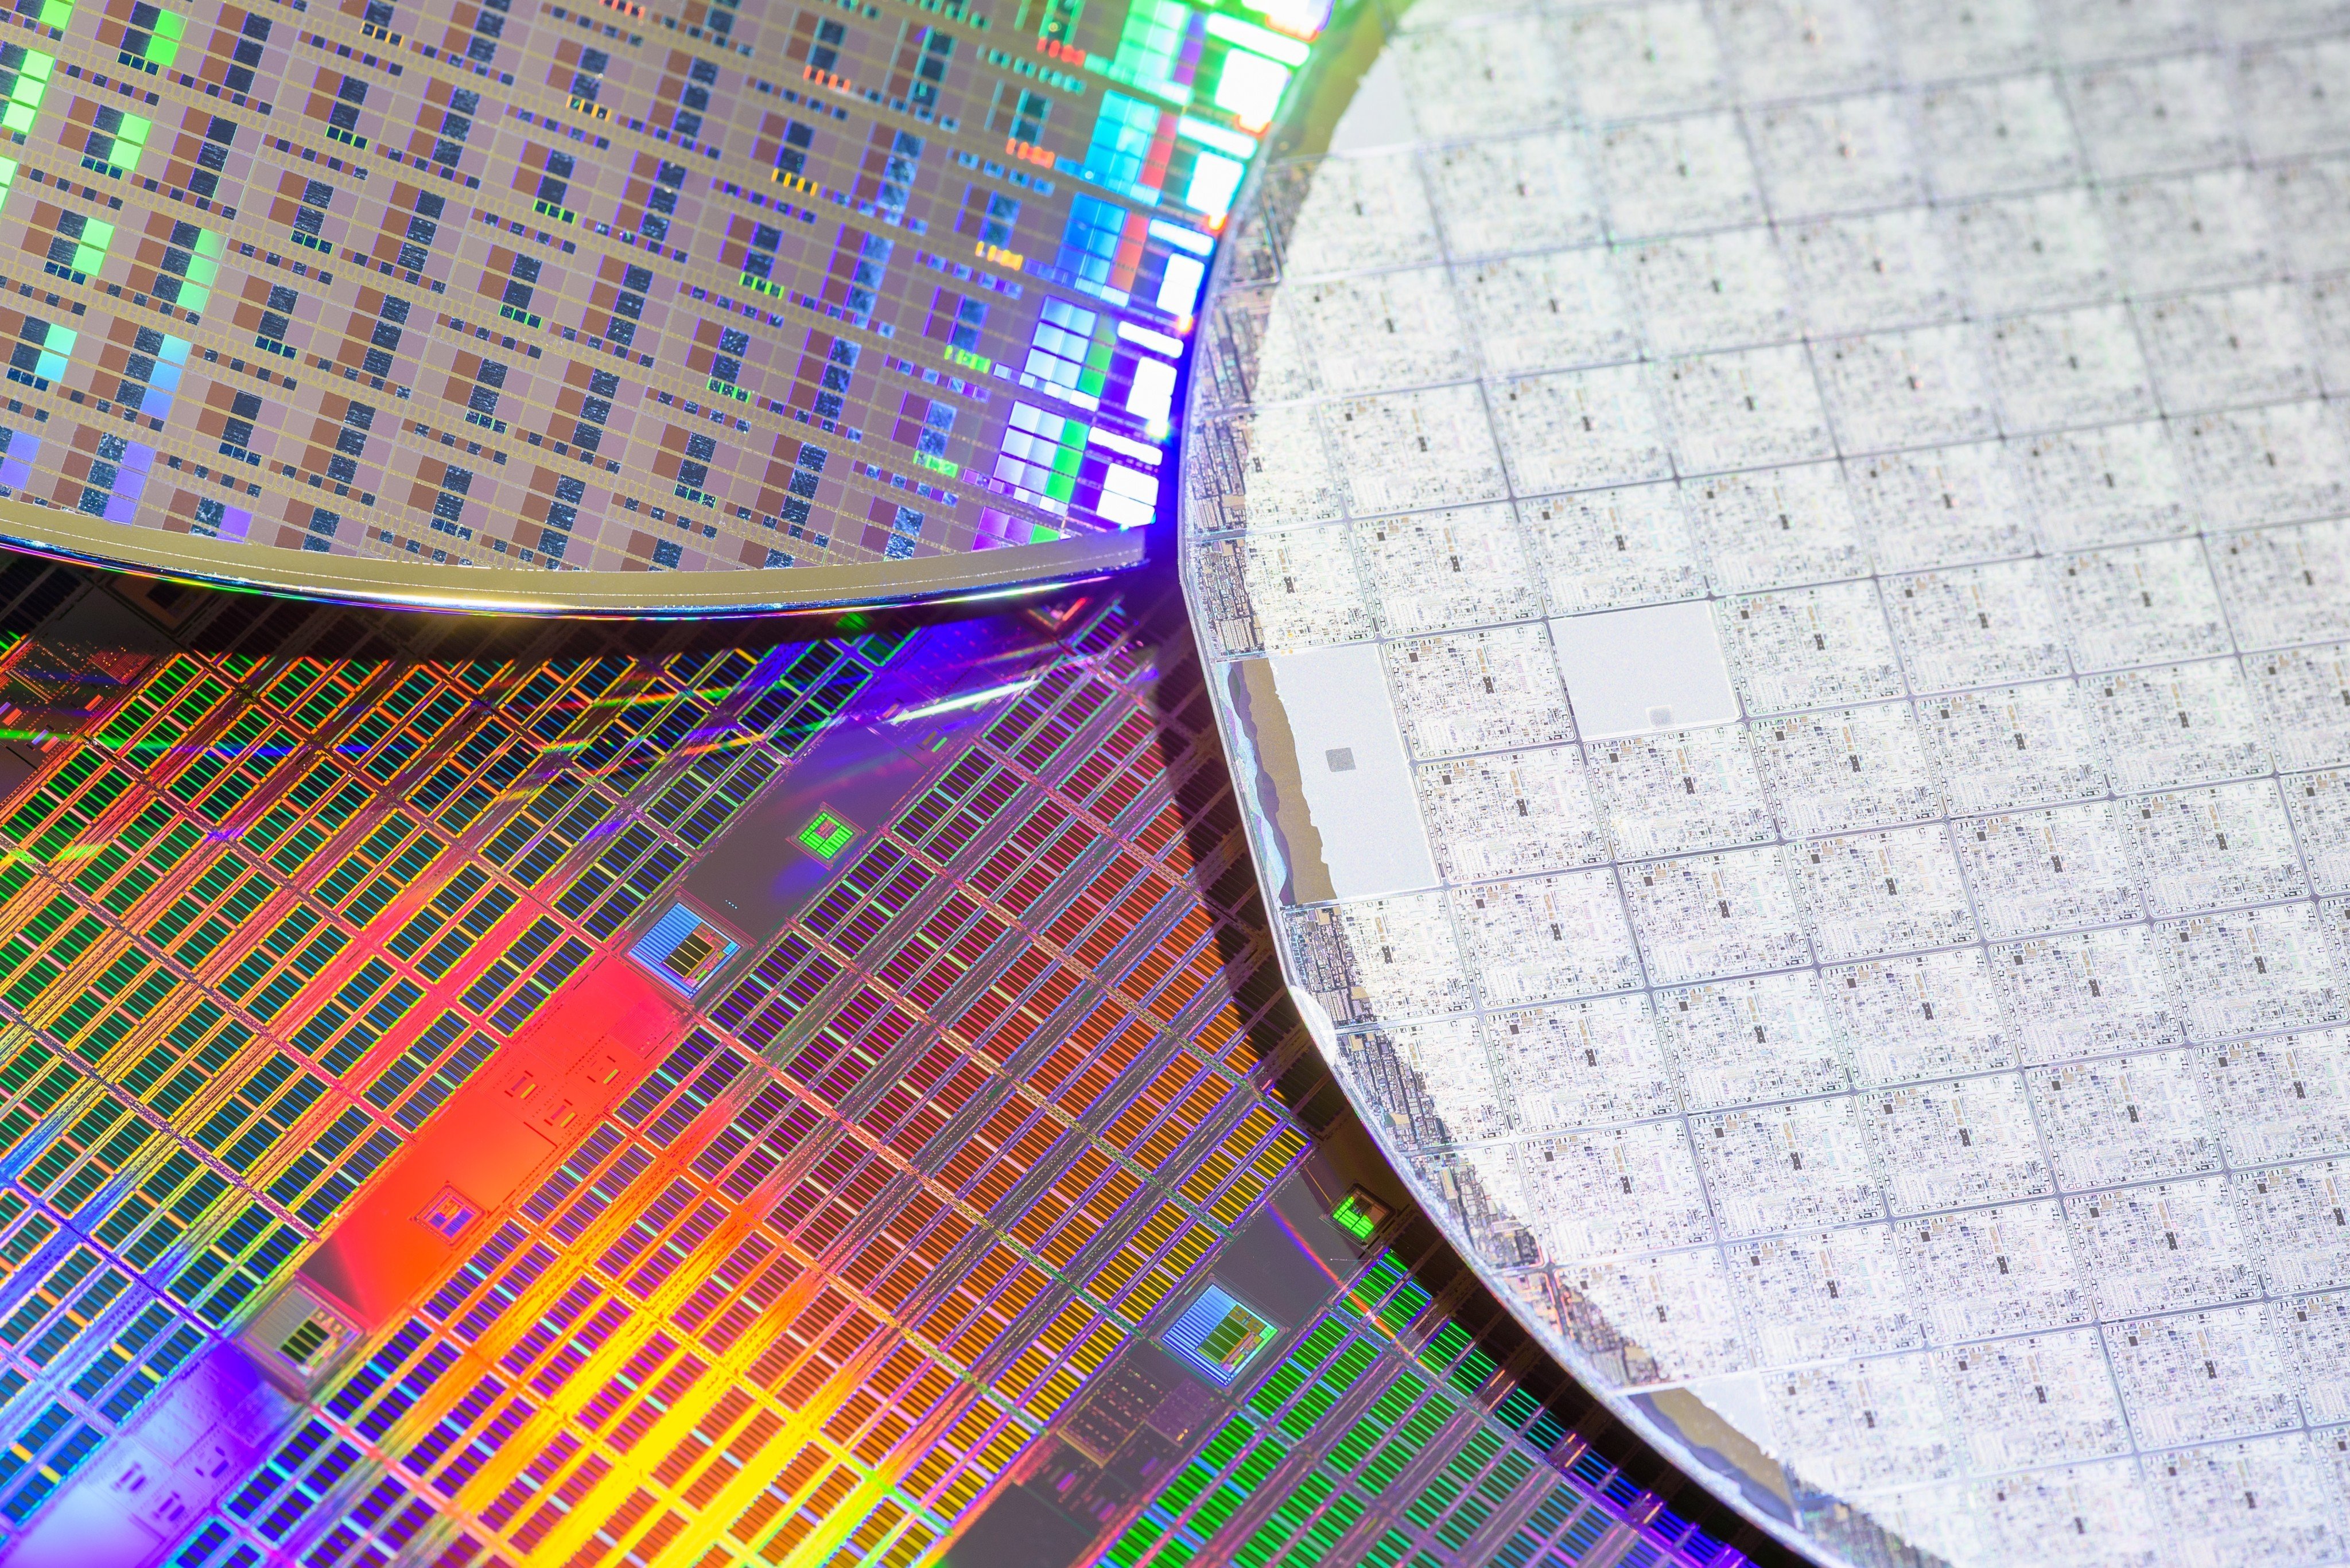 A team of researchers in China say they have found a way to make computing chips smaller and more powerful than silicon-based semiconductors. Photo: Shutterstock